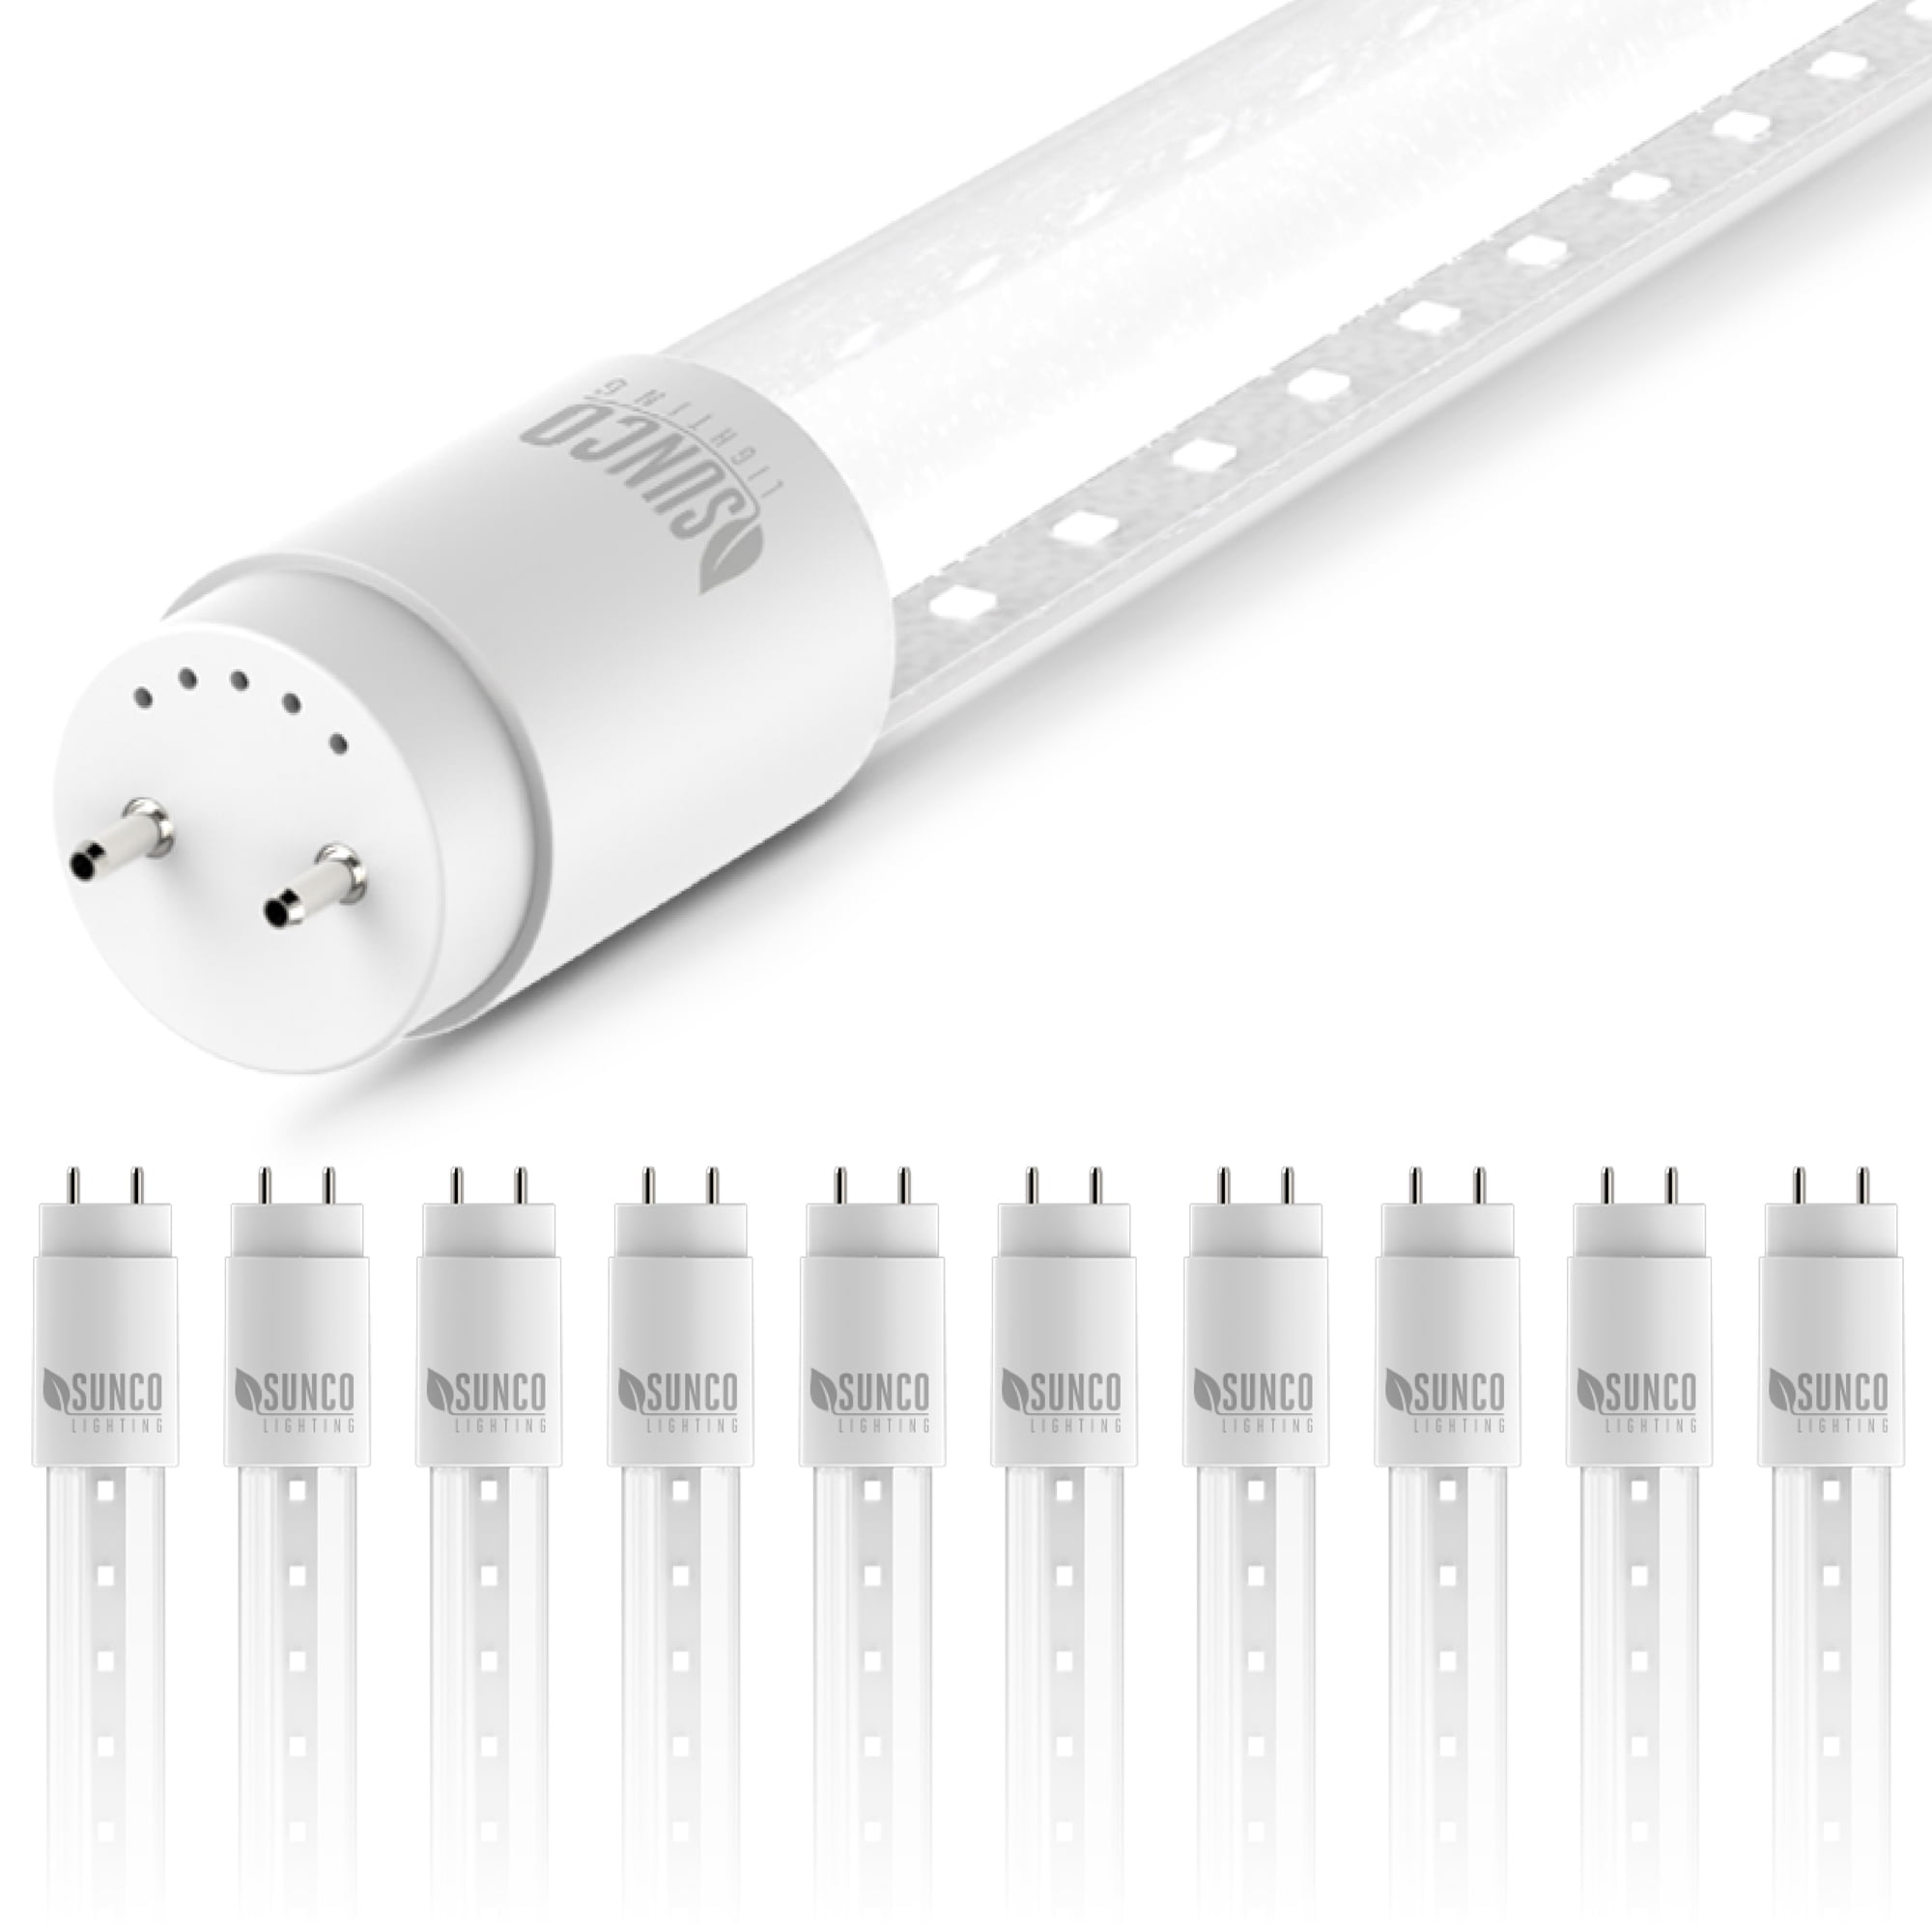 Sunco Lighting 10 Pack 4FT T8 LED Tube, 18W=40W, Fluorescent, Clear Cover,  5000K Daylight, Single Ended Power (SEP), Ballast Bypass, Commercial Grade  UL Listed